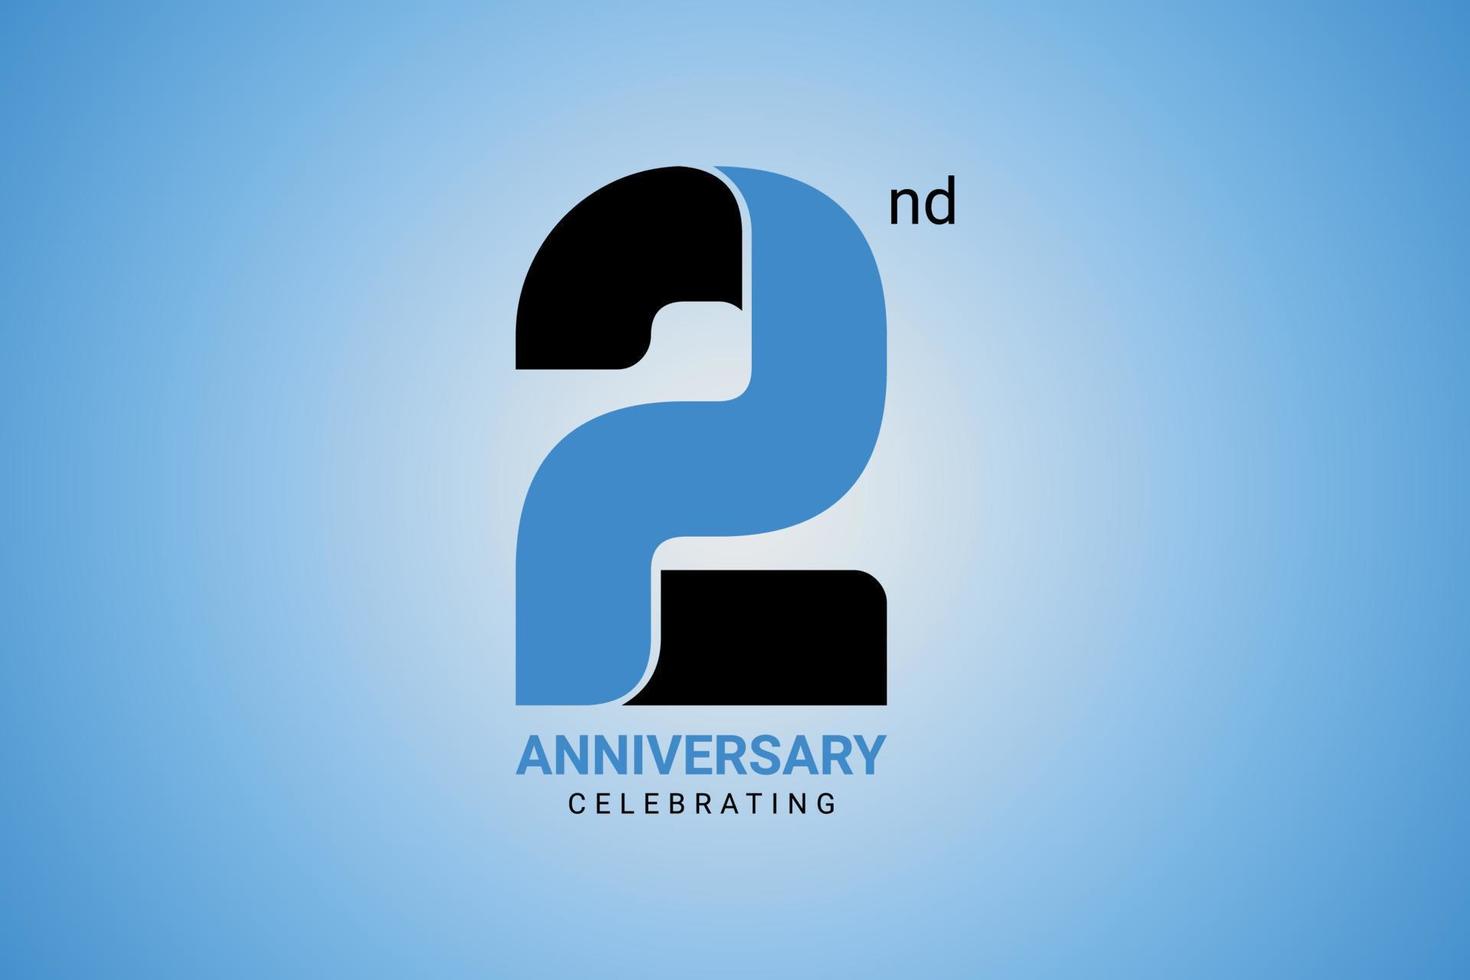 2nd anniversary celebrating design on blue and white vector